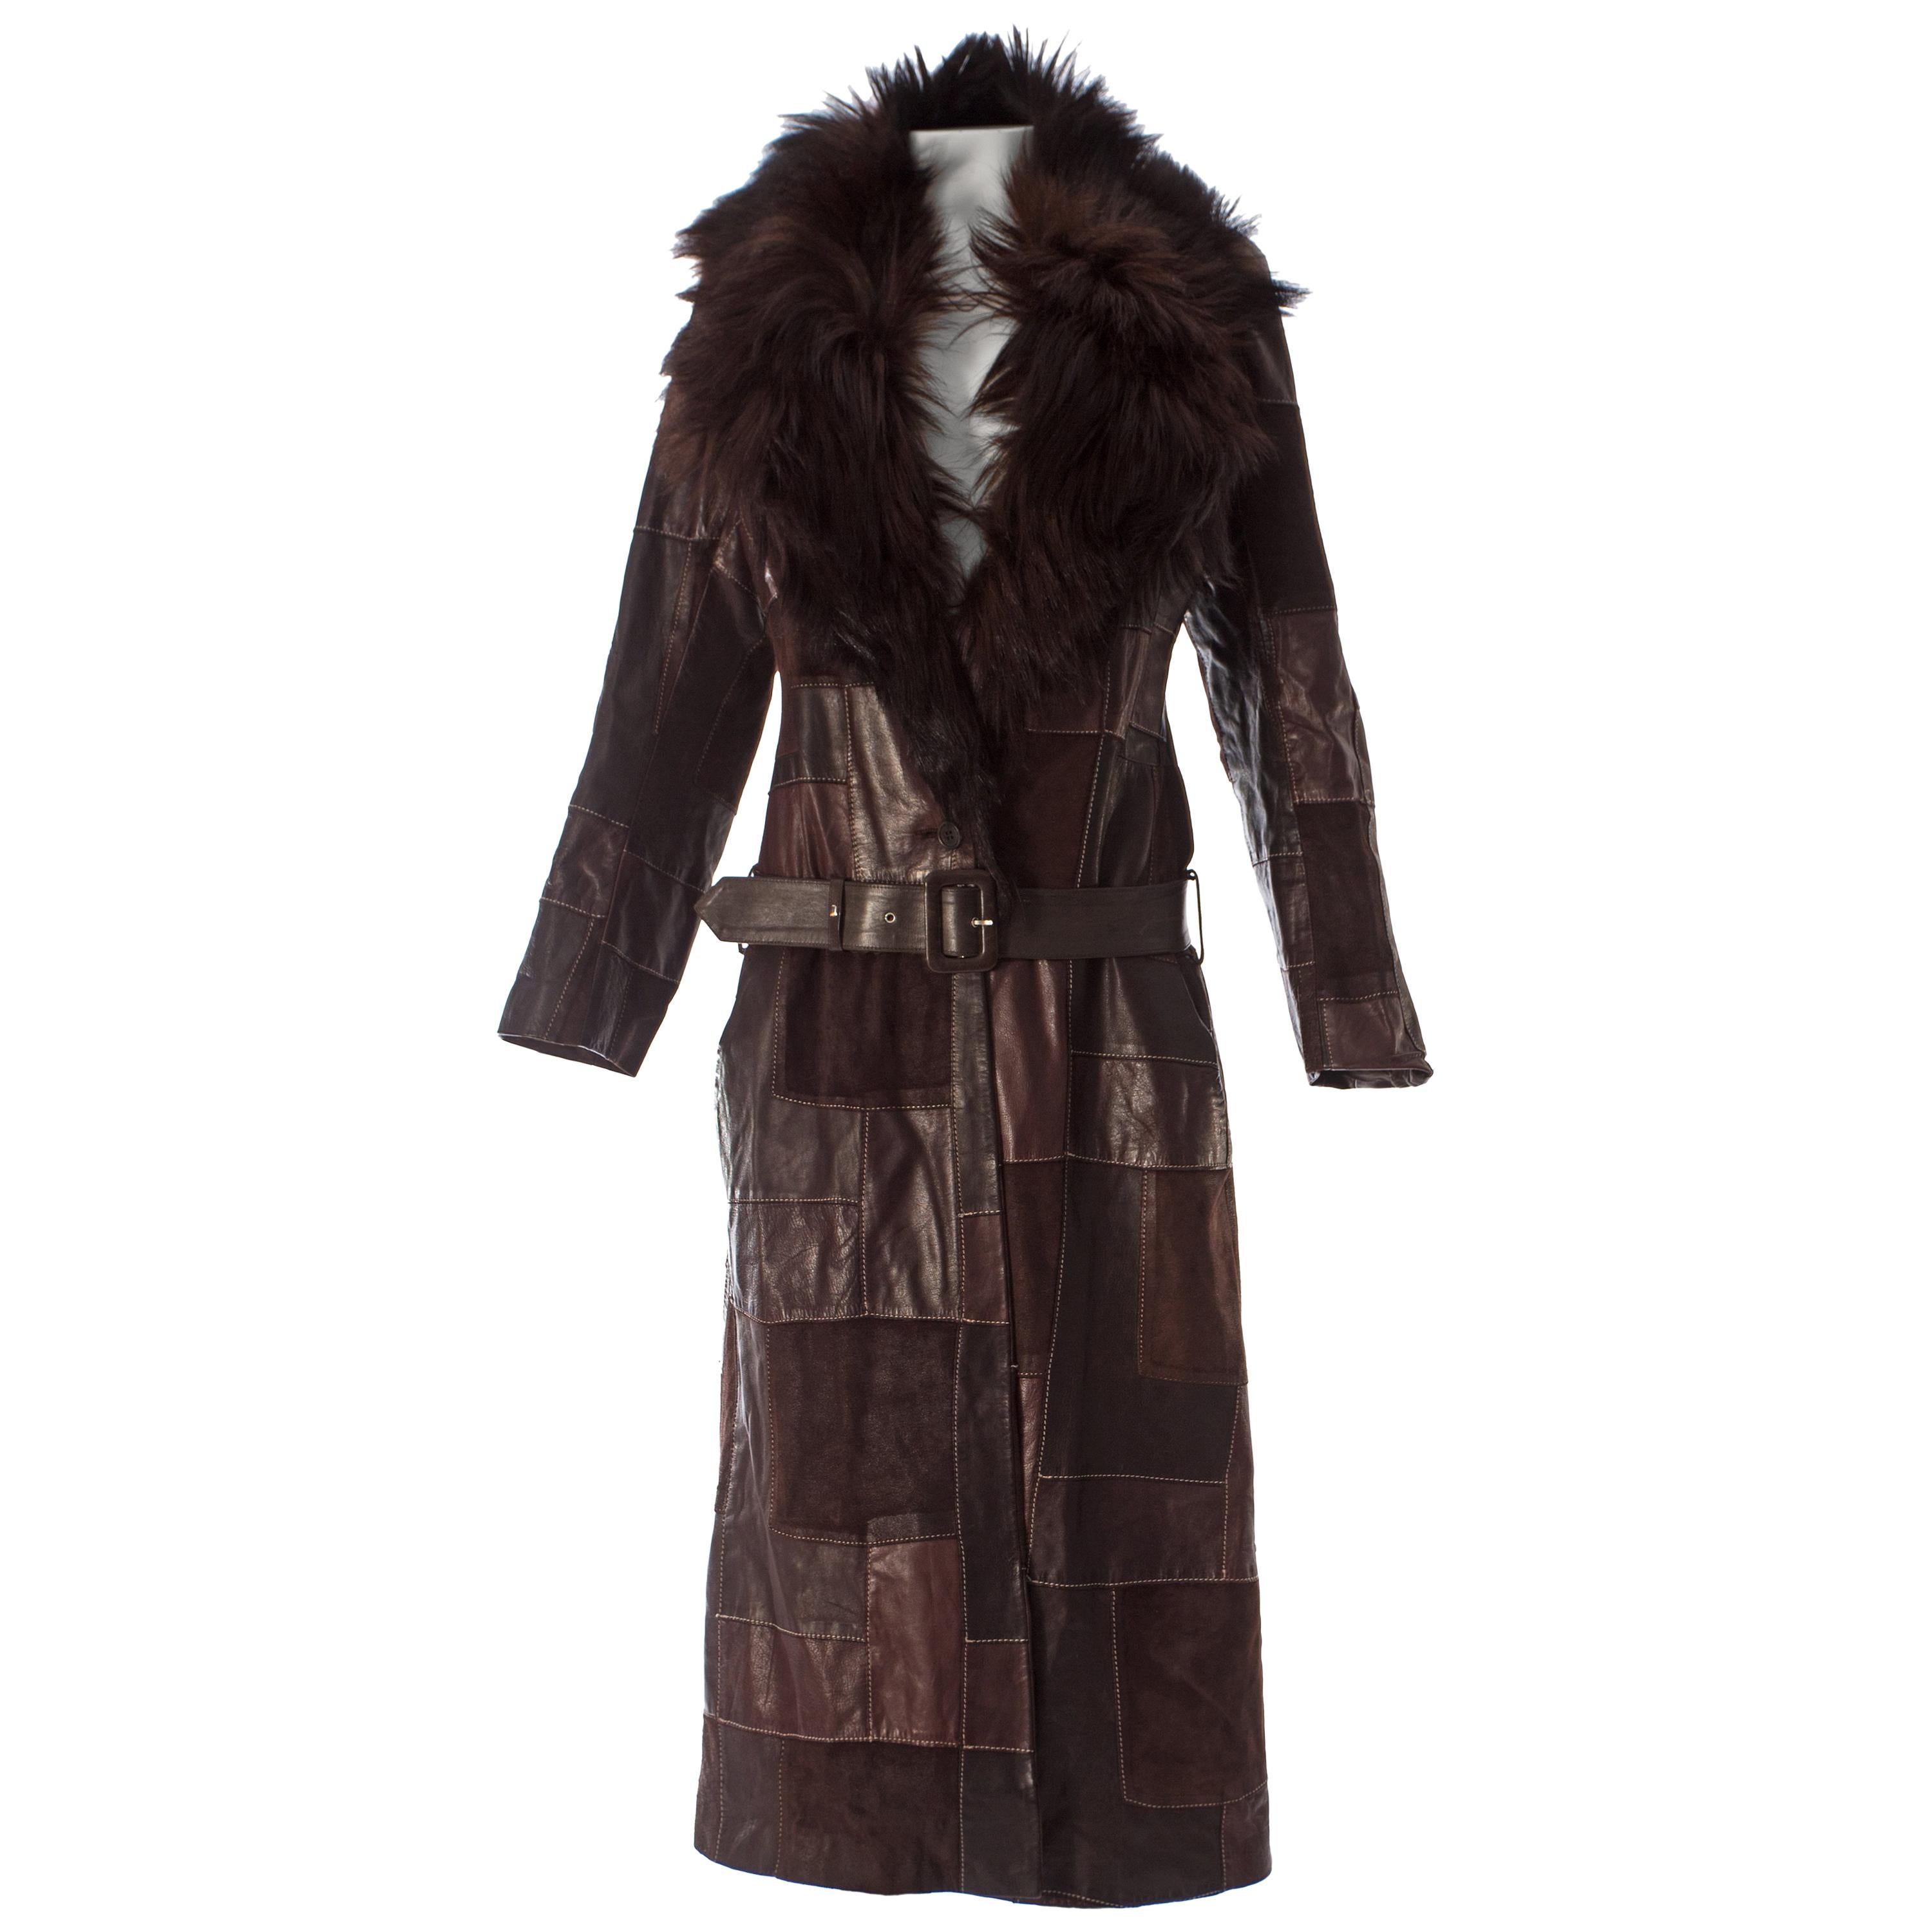 Alexander McQueen brown leather patchwork coat with goat hair collar, A / W 2000